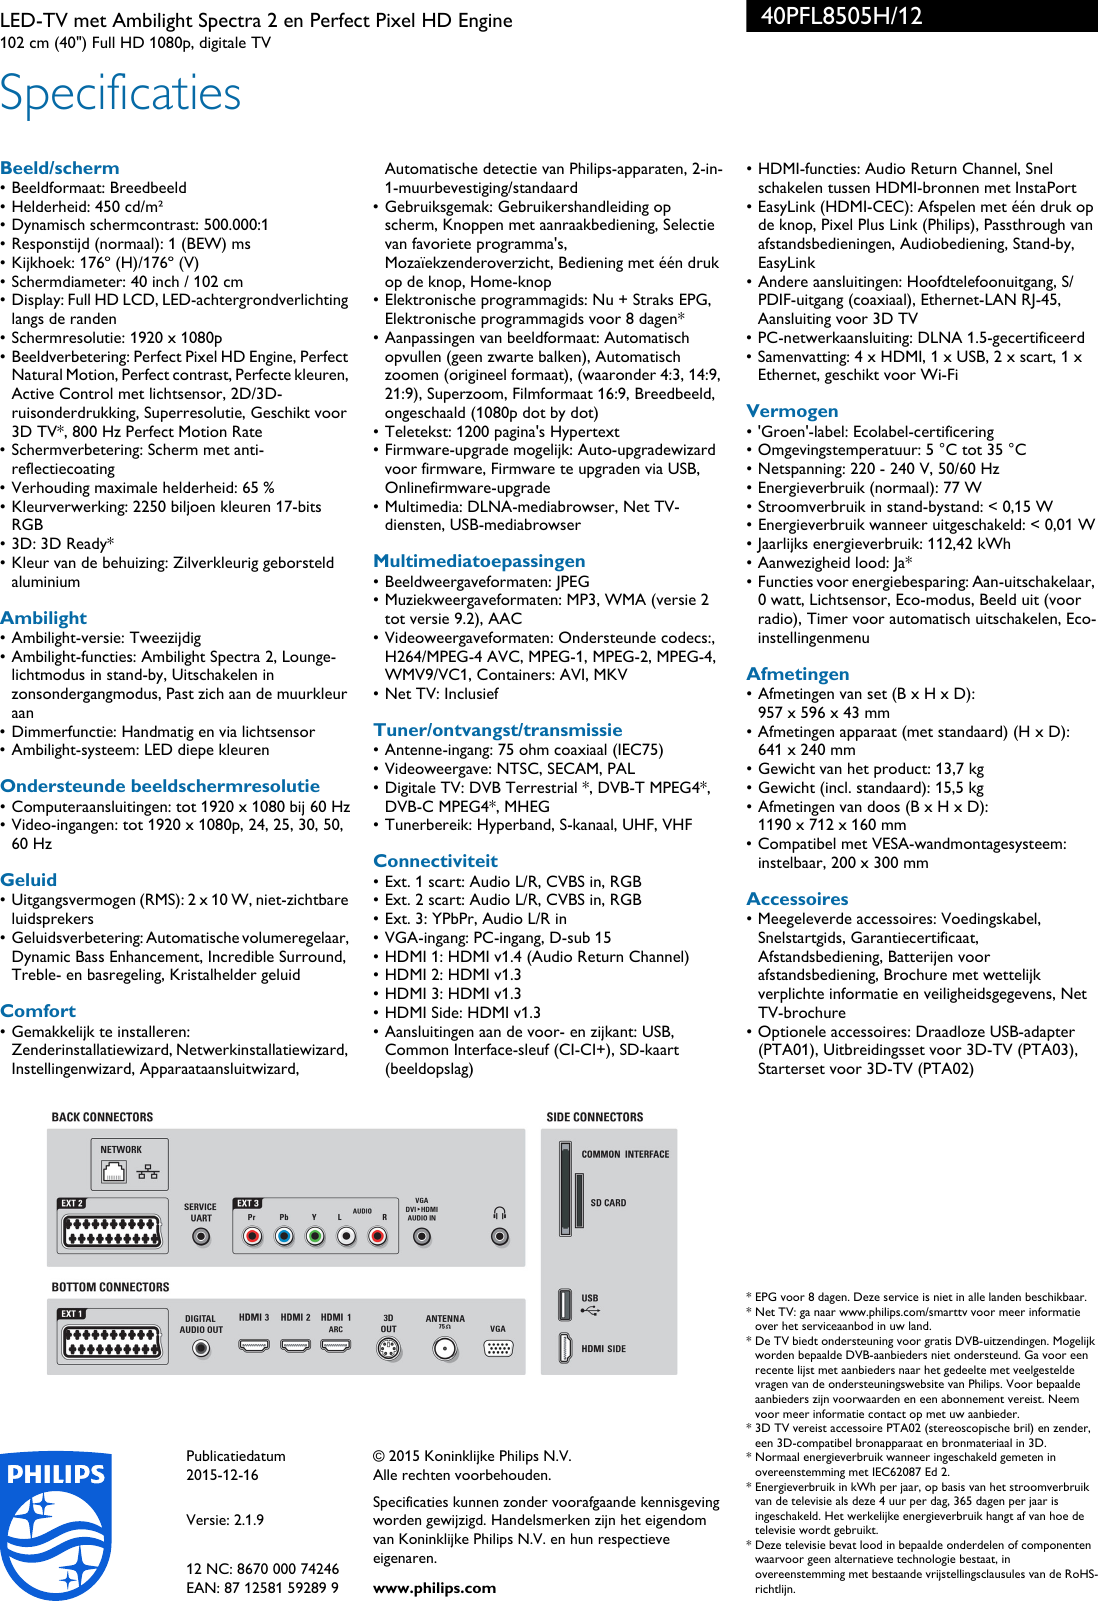 Page 3 of 3 - Philips 40PFL8505H/12 LED-TV Met Ambilight Spectra 2 En Perfect Pixel HD Engine User Manual Brochure 40pfl8505h 12 Pss Nldnl